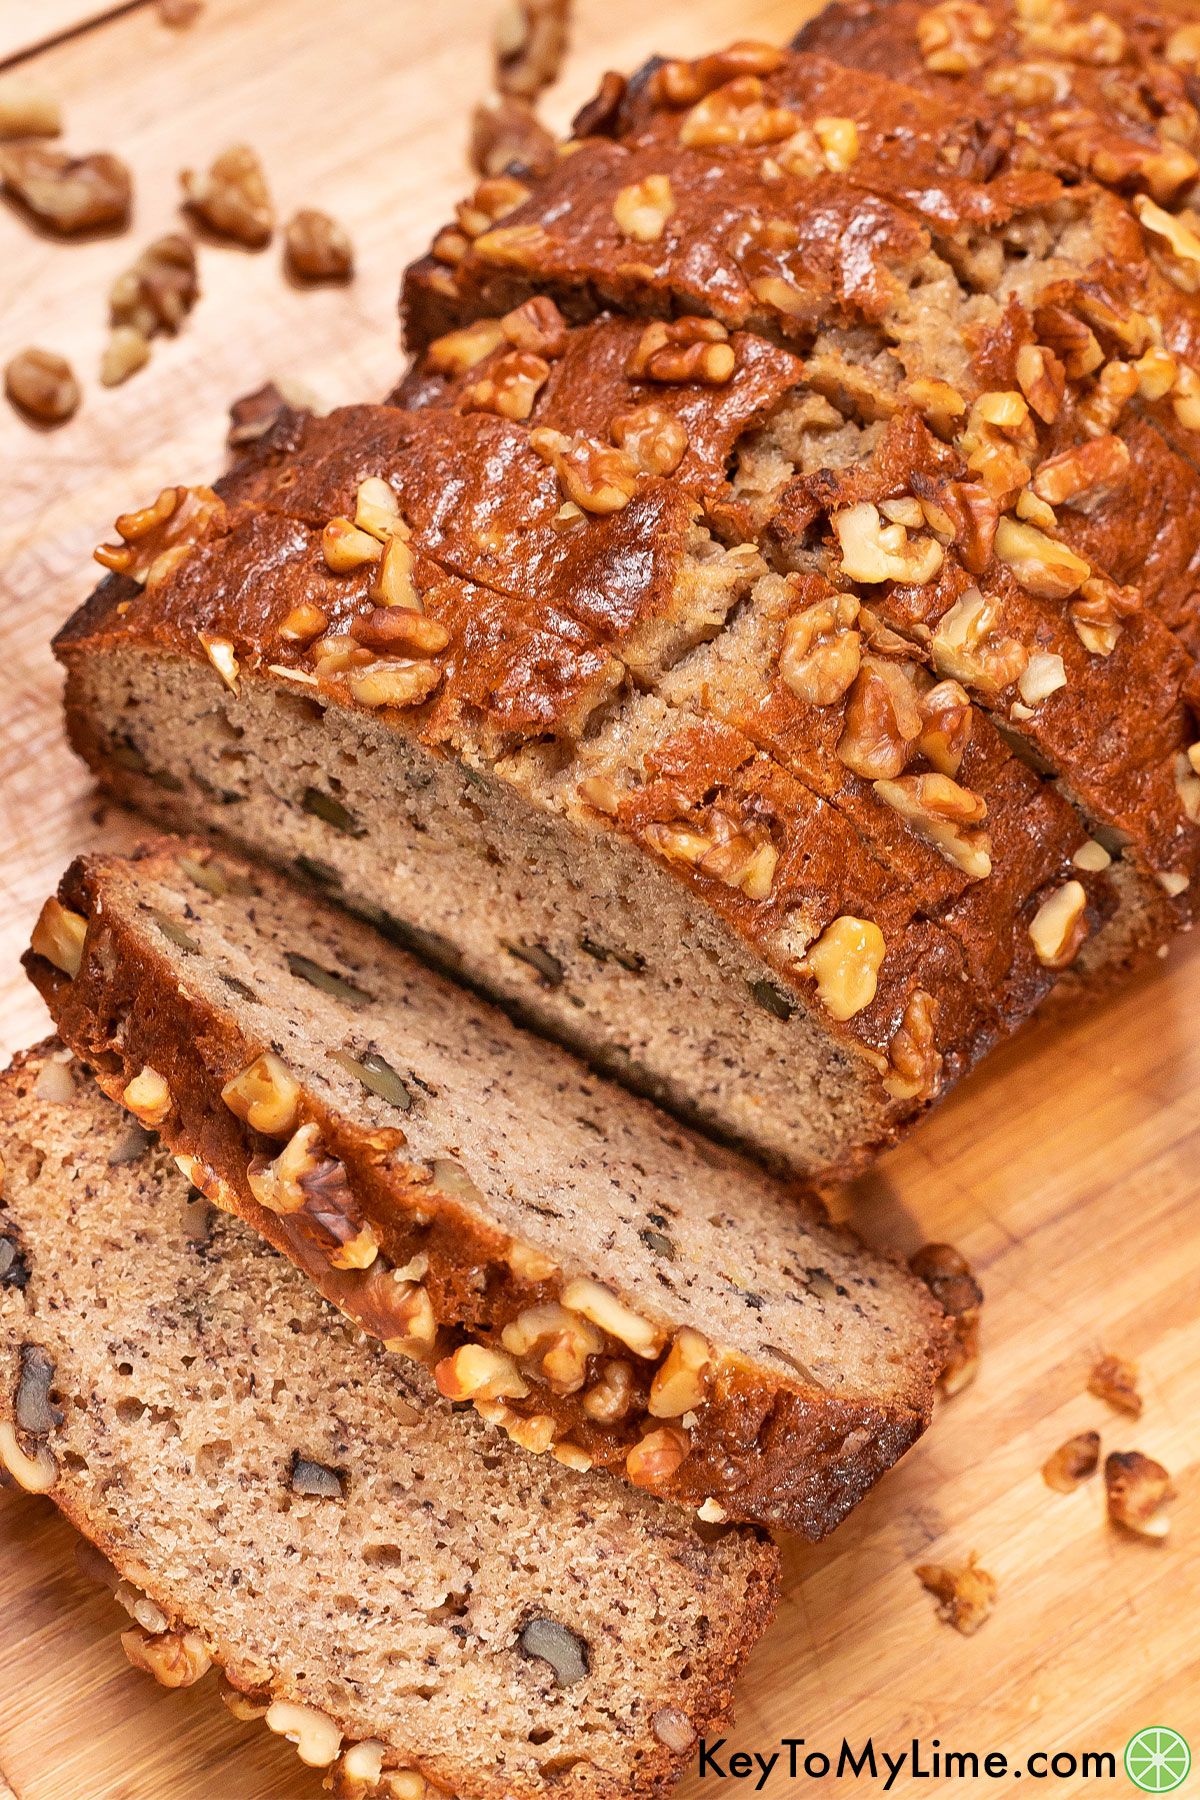 A close up side overhead shot showing the inside texture of the banana bread.